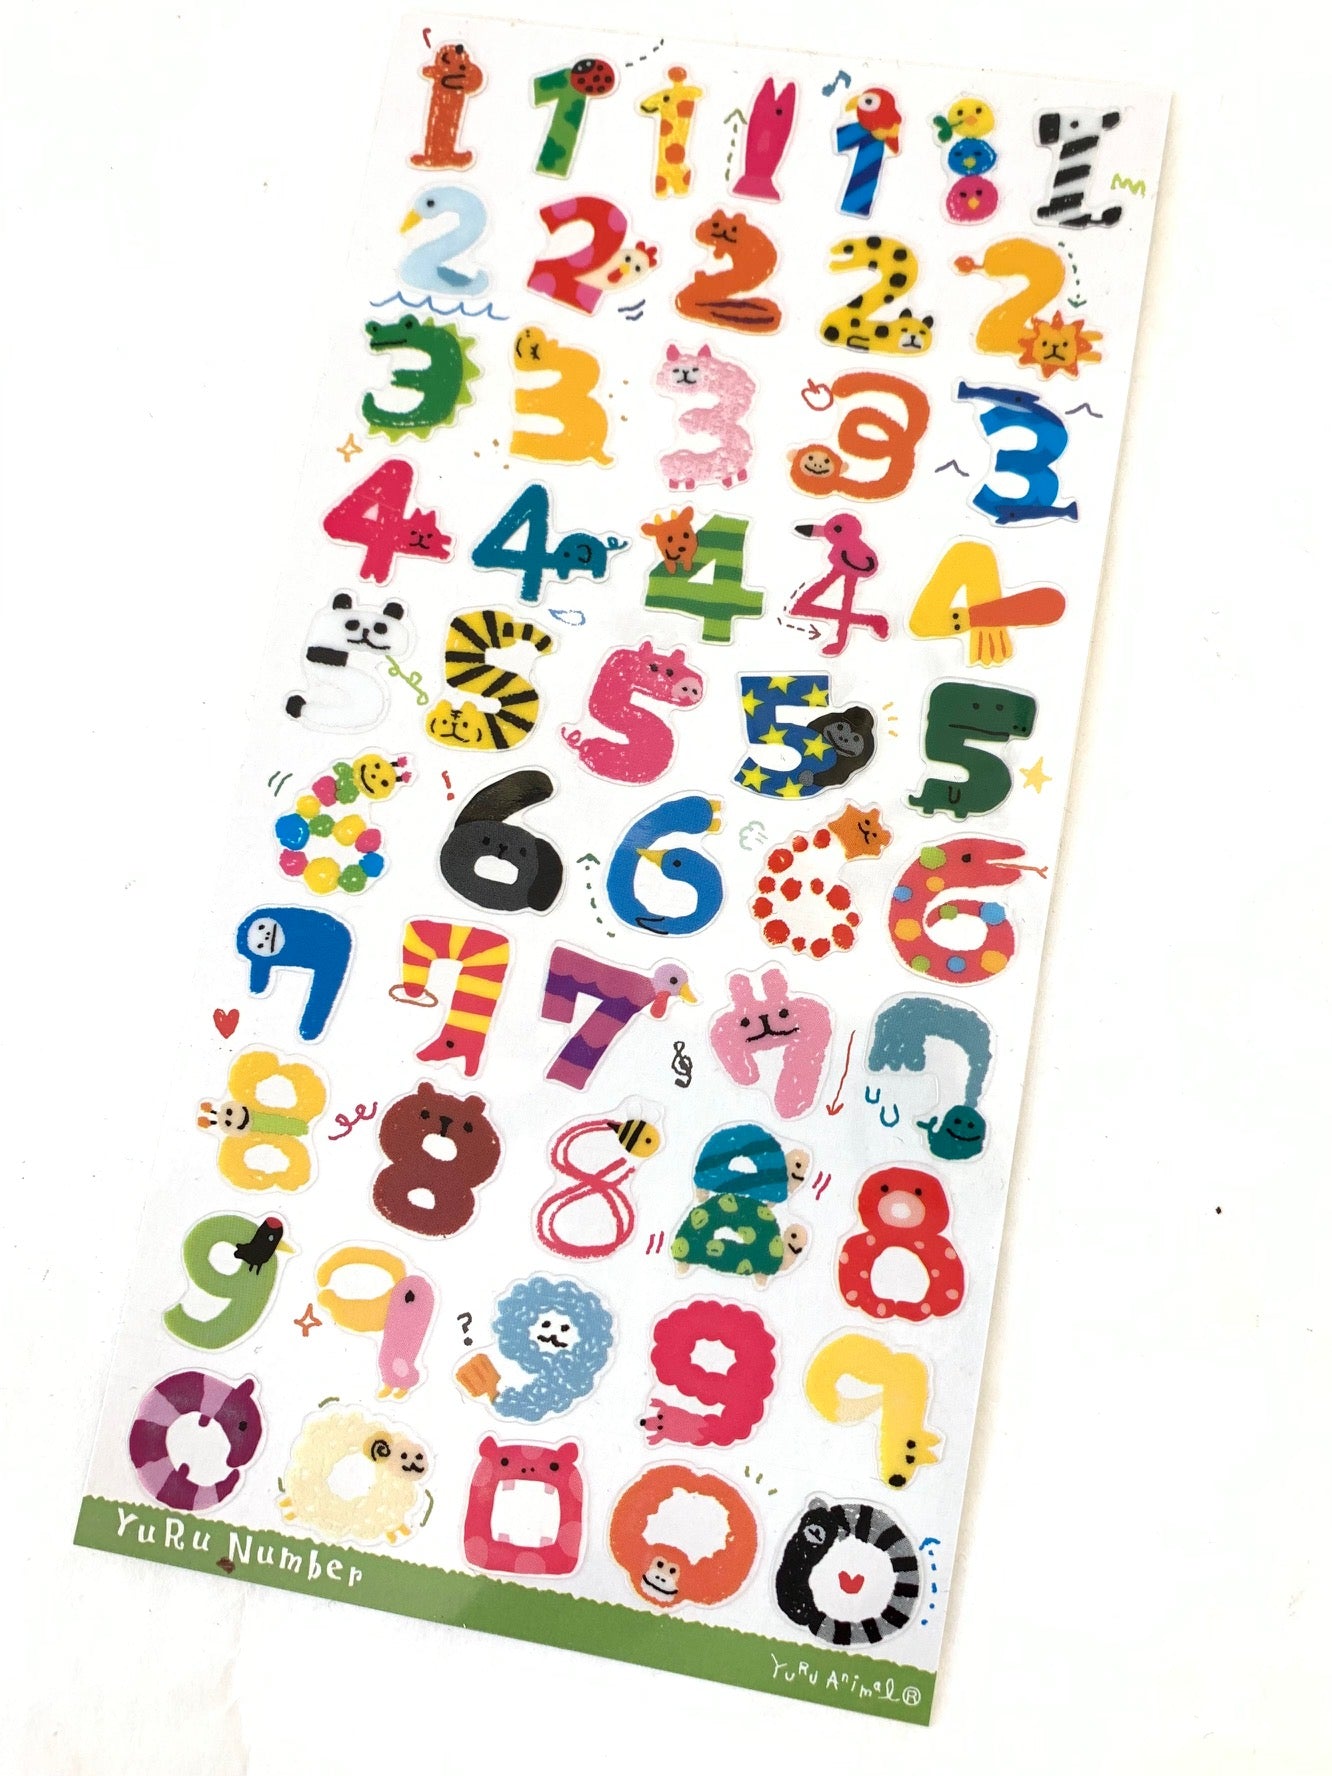 X 75107 ANIMAL NUMBERS STICKERS-DISCONTINUED